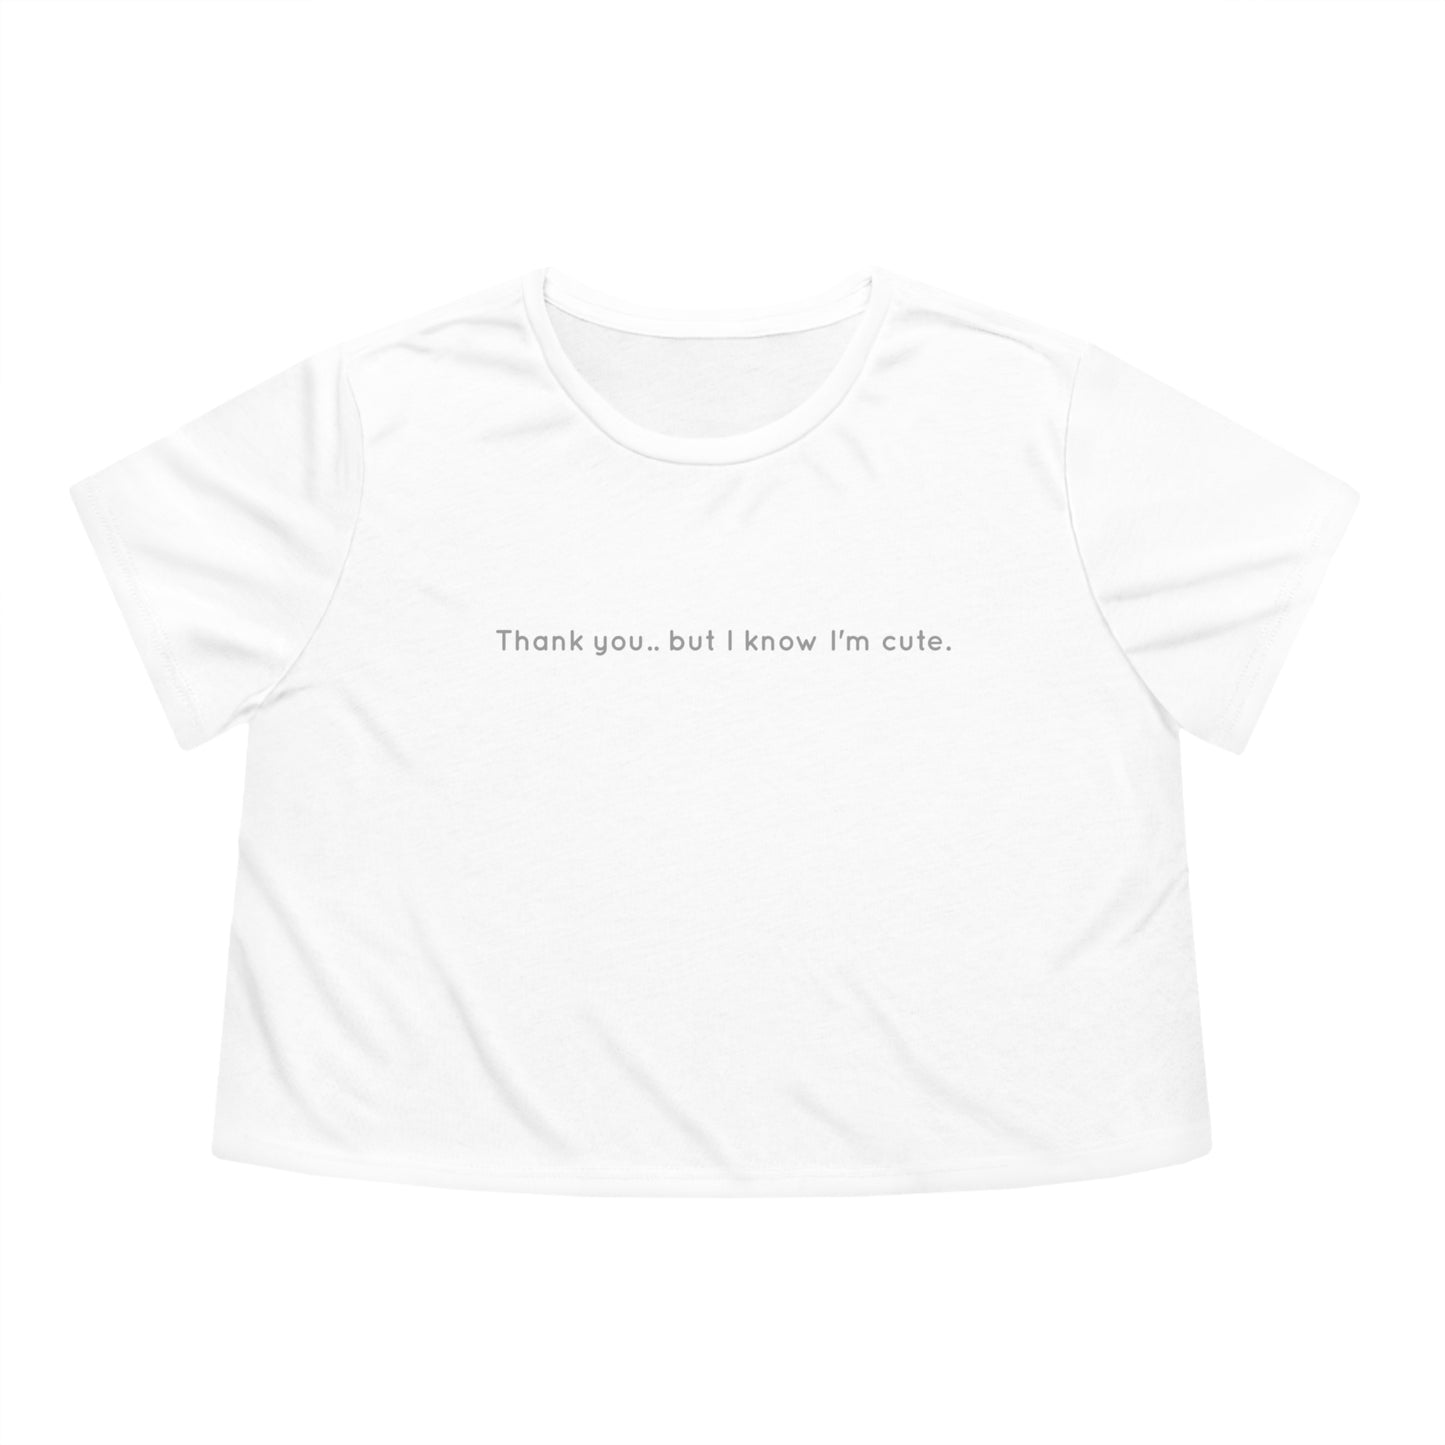 "Thank you, but I know I'm cute." Cropped Tee